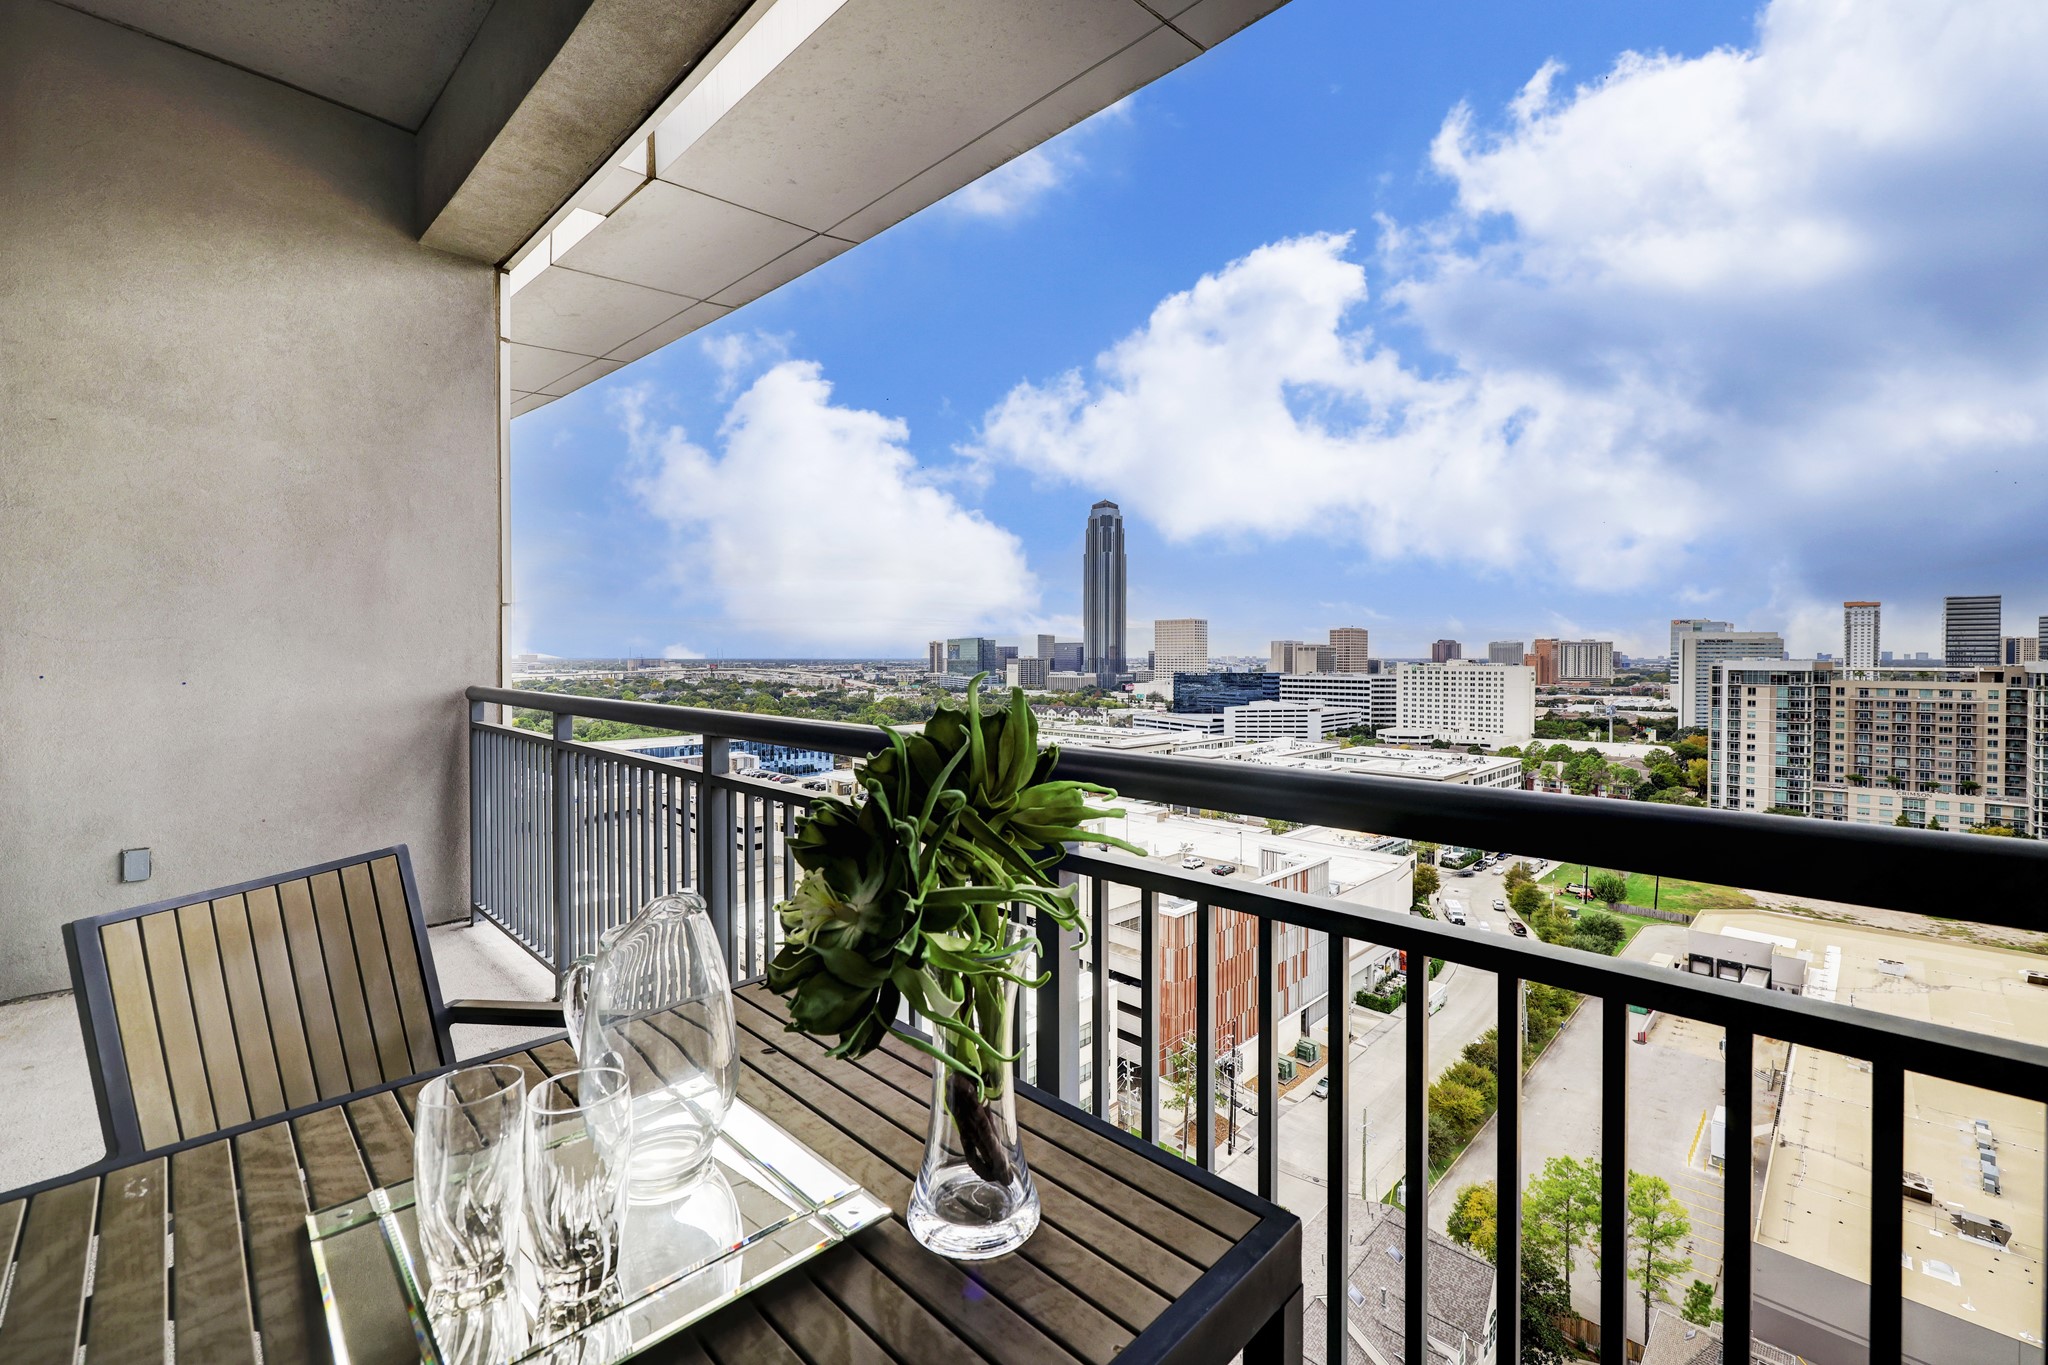 Don't miss this unparalleled opportunity to embrace a luxurious lifestyle in Houston! Conveniently located inside The 610 Loop with quick access to The Galleria, Downtown, The Texas Medical Center and endless first-class shopping and dining.